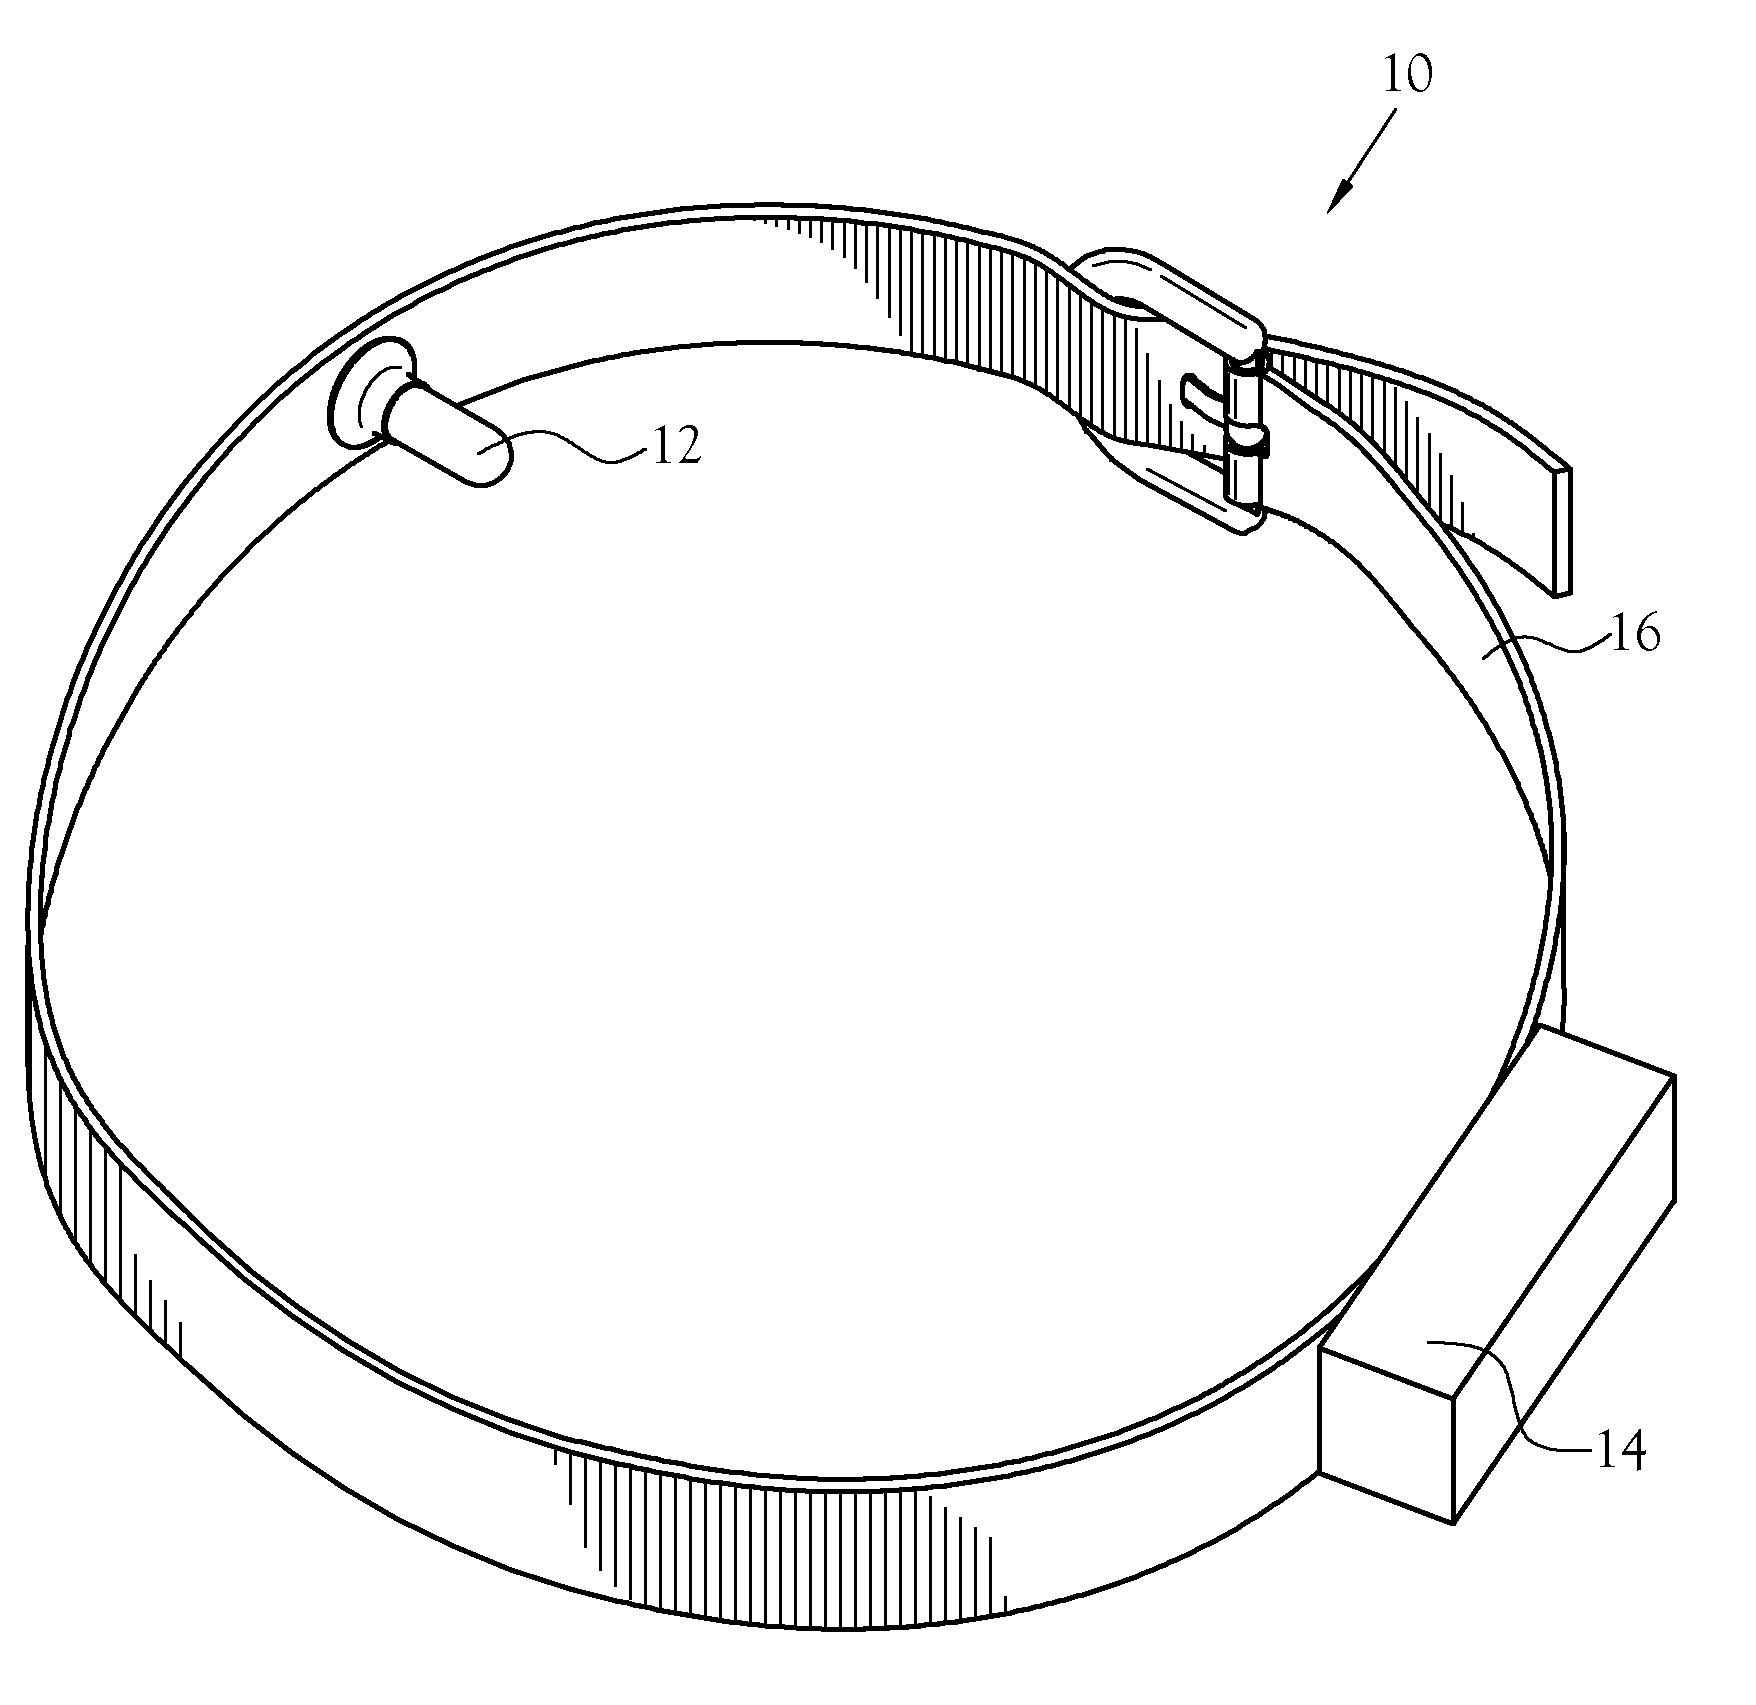 Animal Training Device Using a Vibration Probe to Deliver a Vibration Stimulus to an Animal